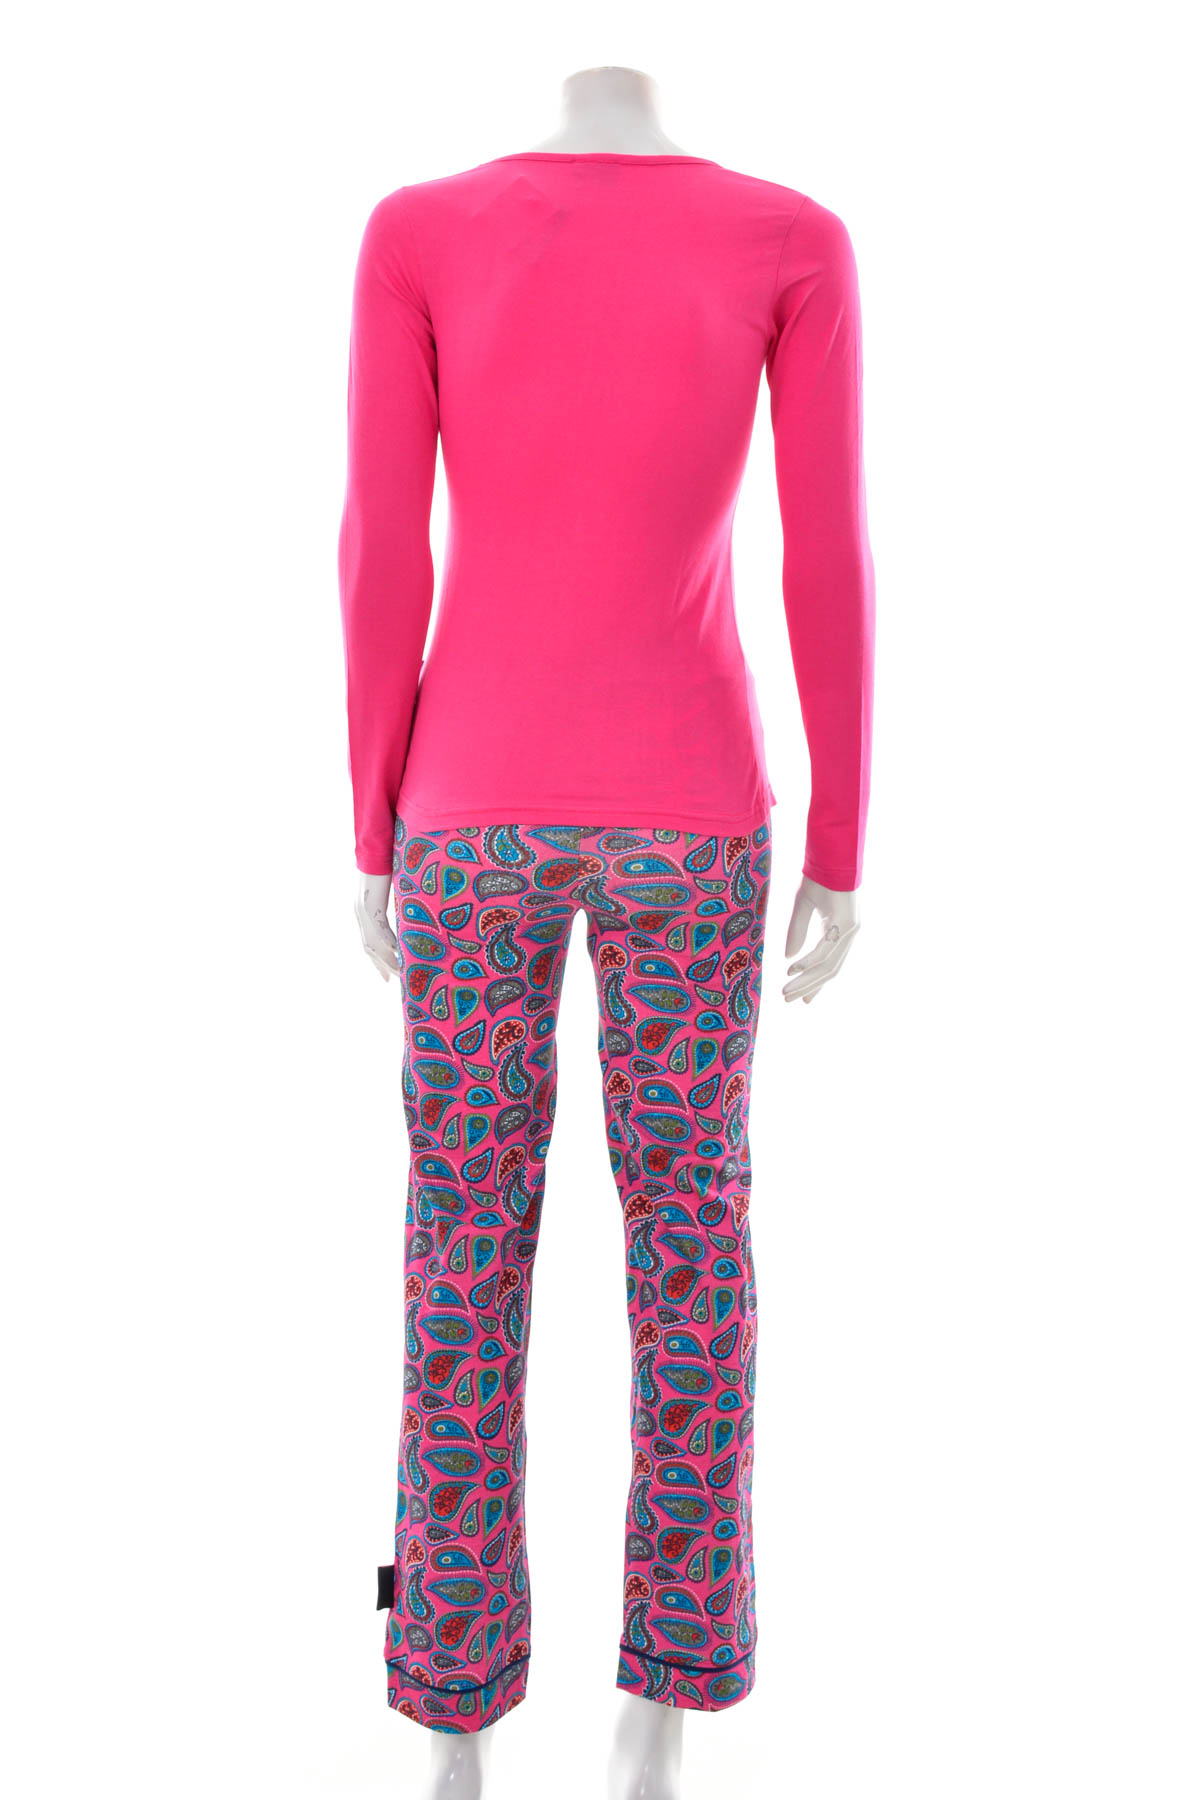 Pajamas for girls - IT's mee - 1